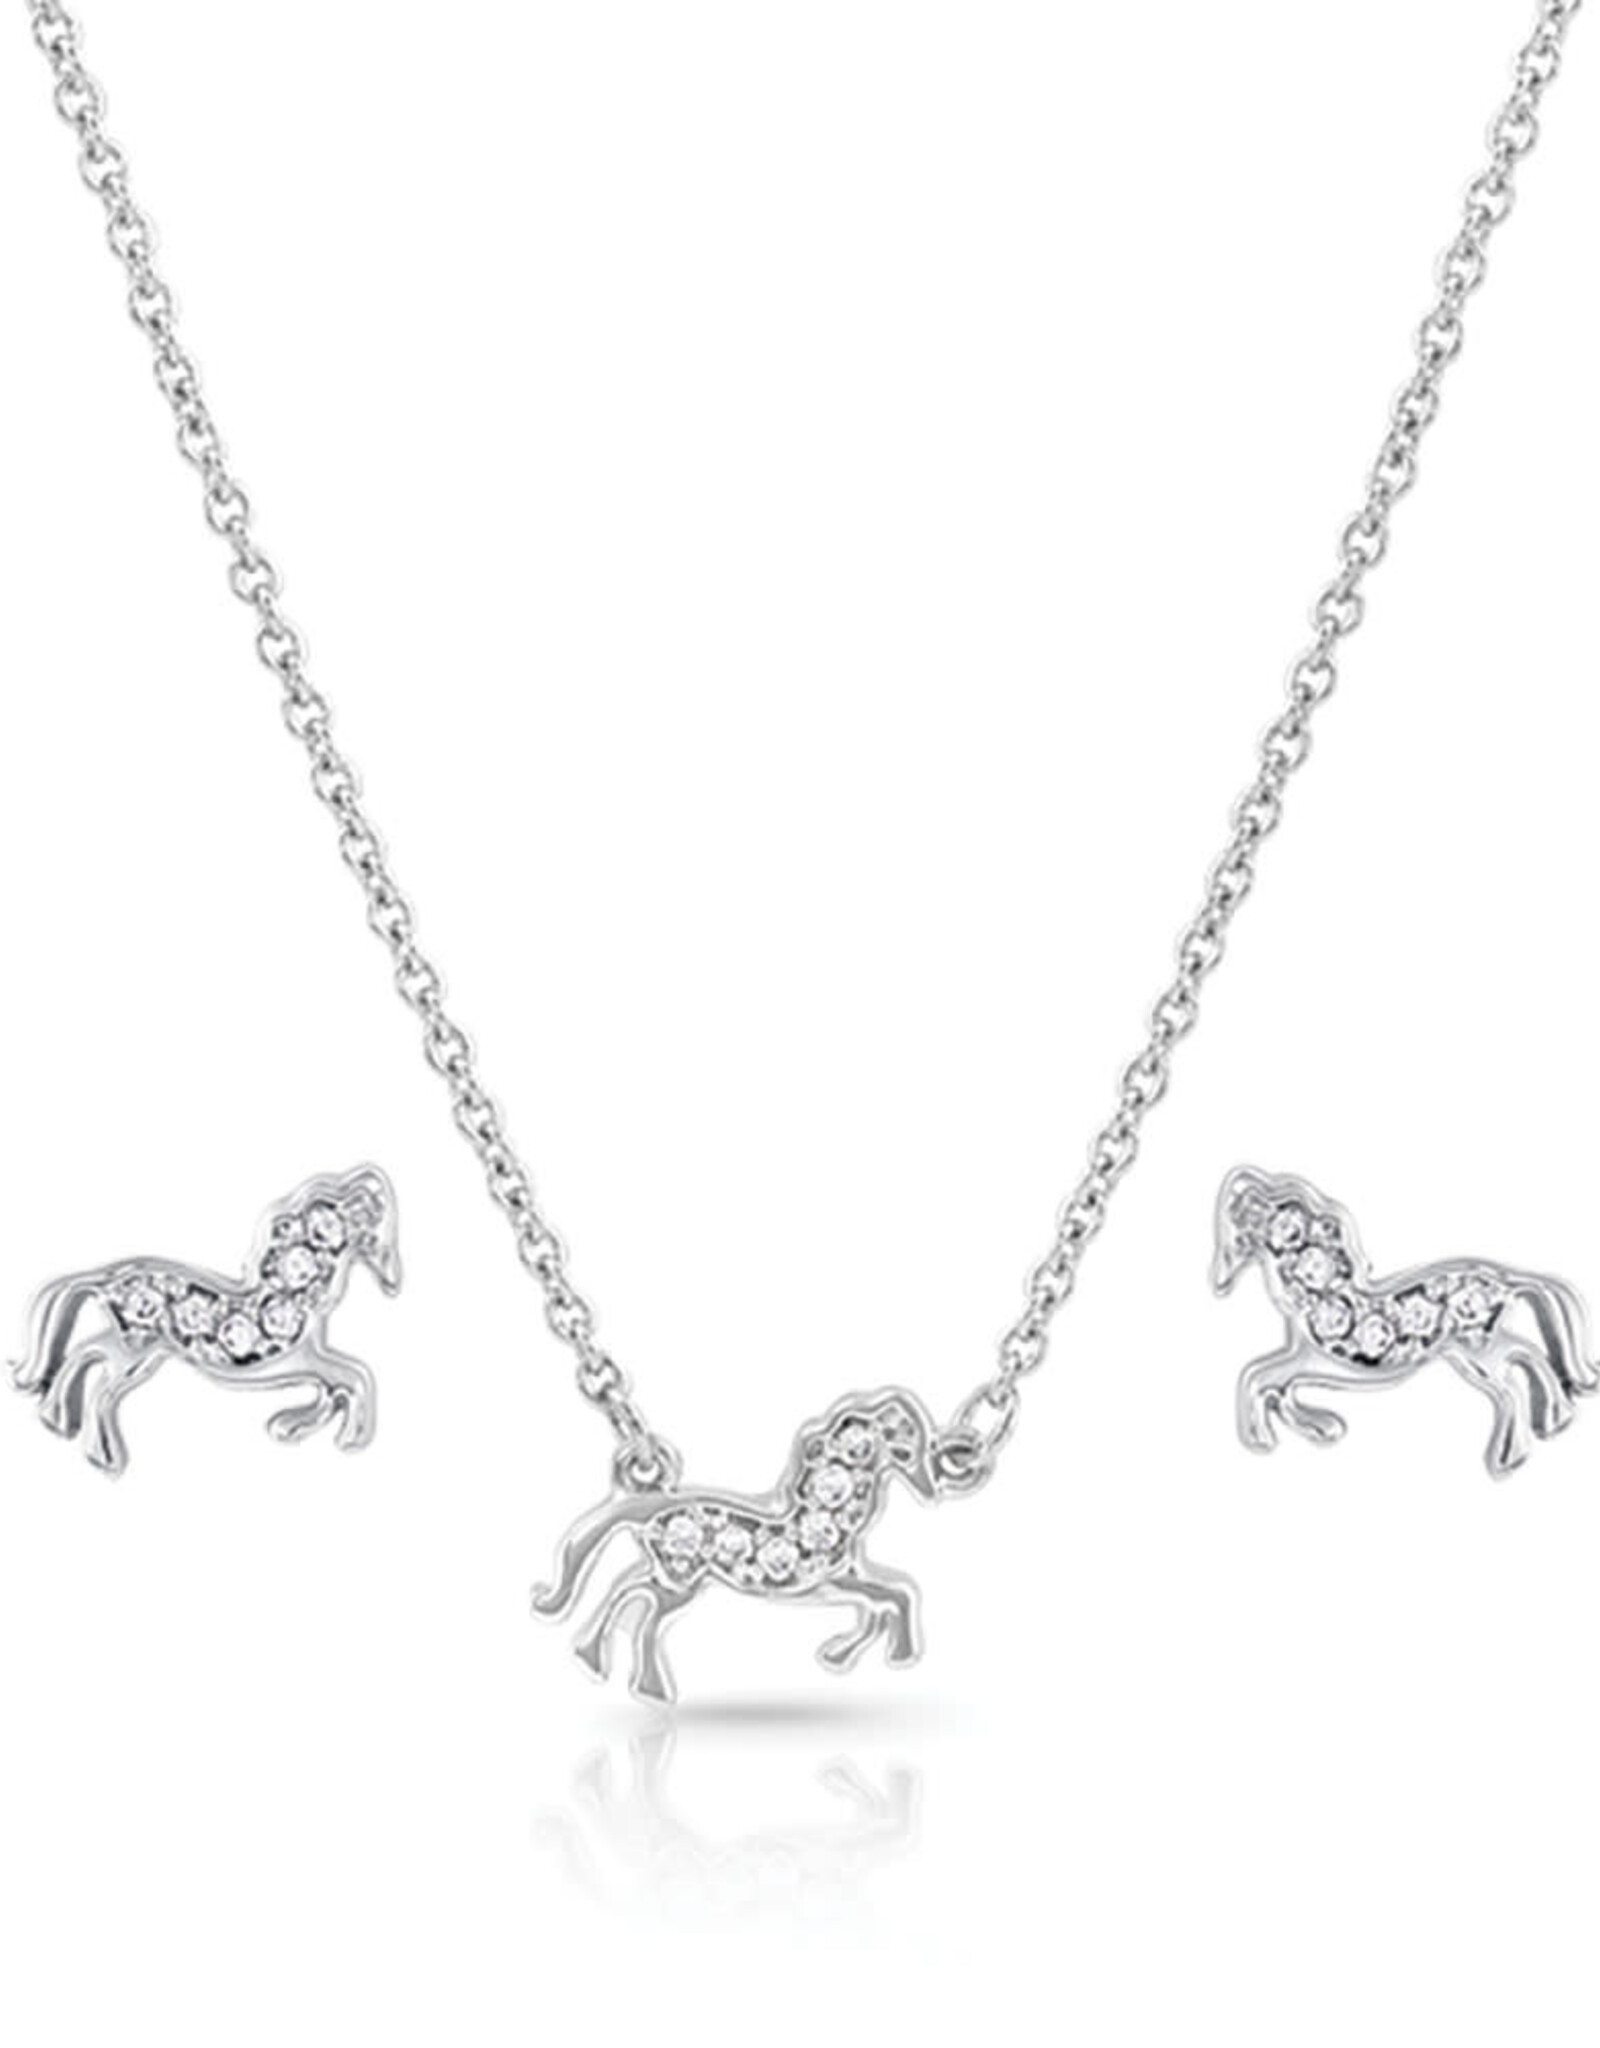 Montana Silversmiths All The Pretty Horses Necklace and Earring Set